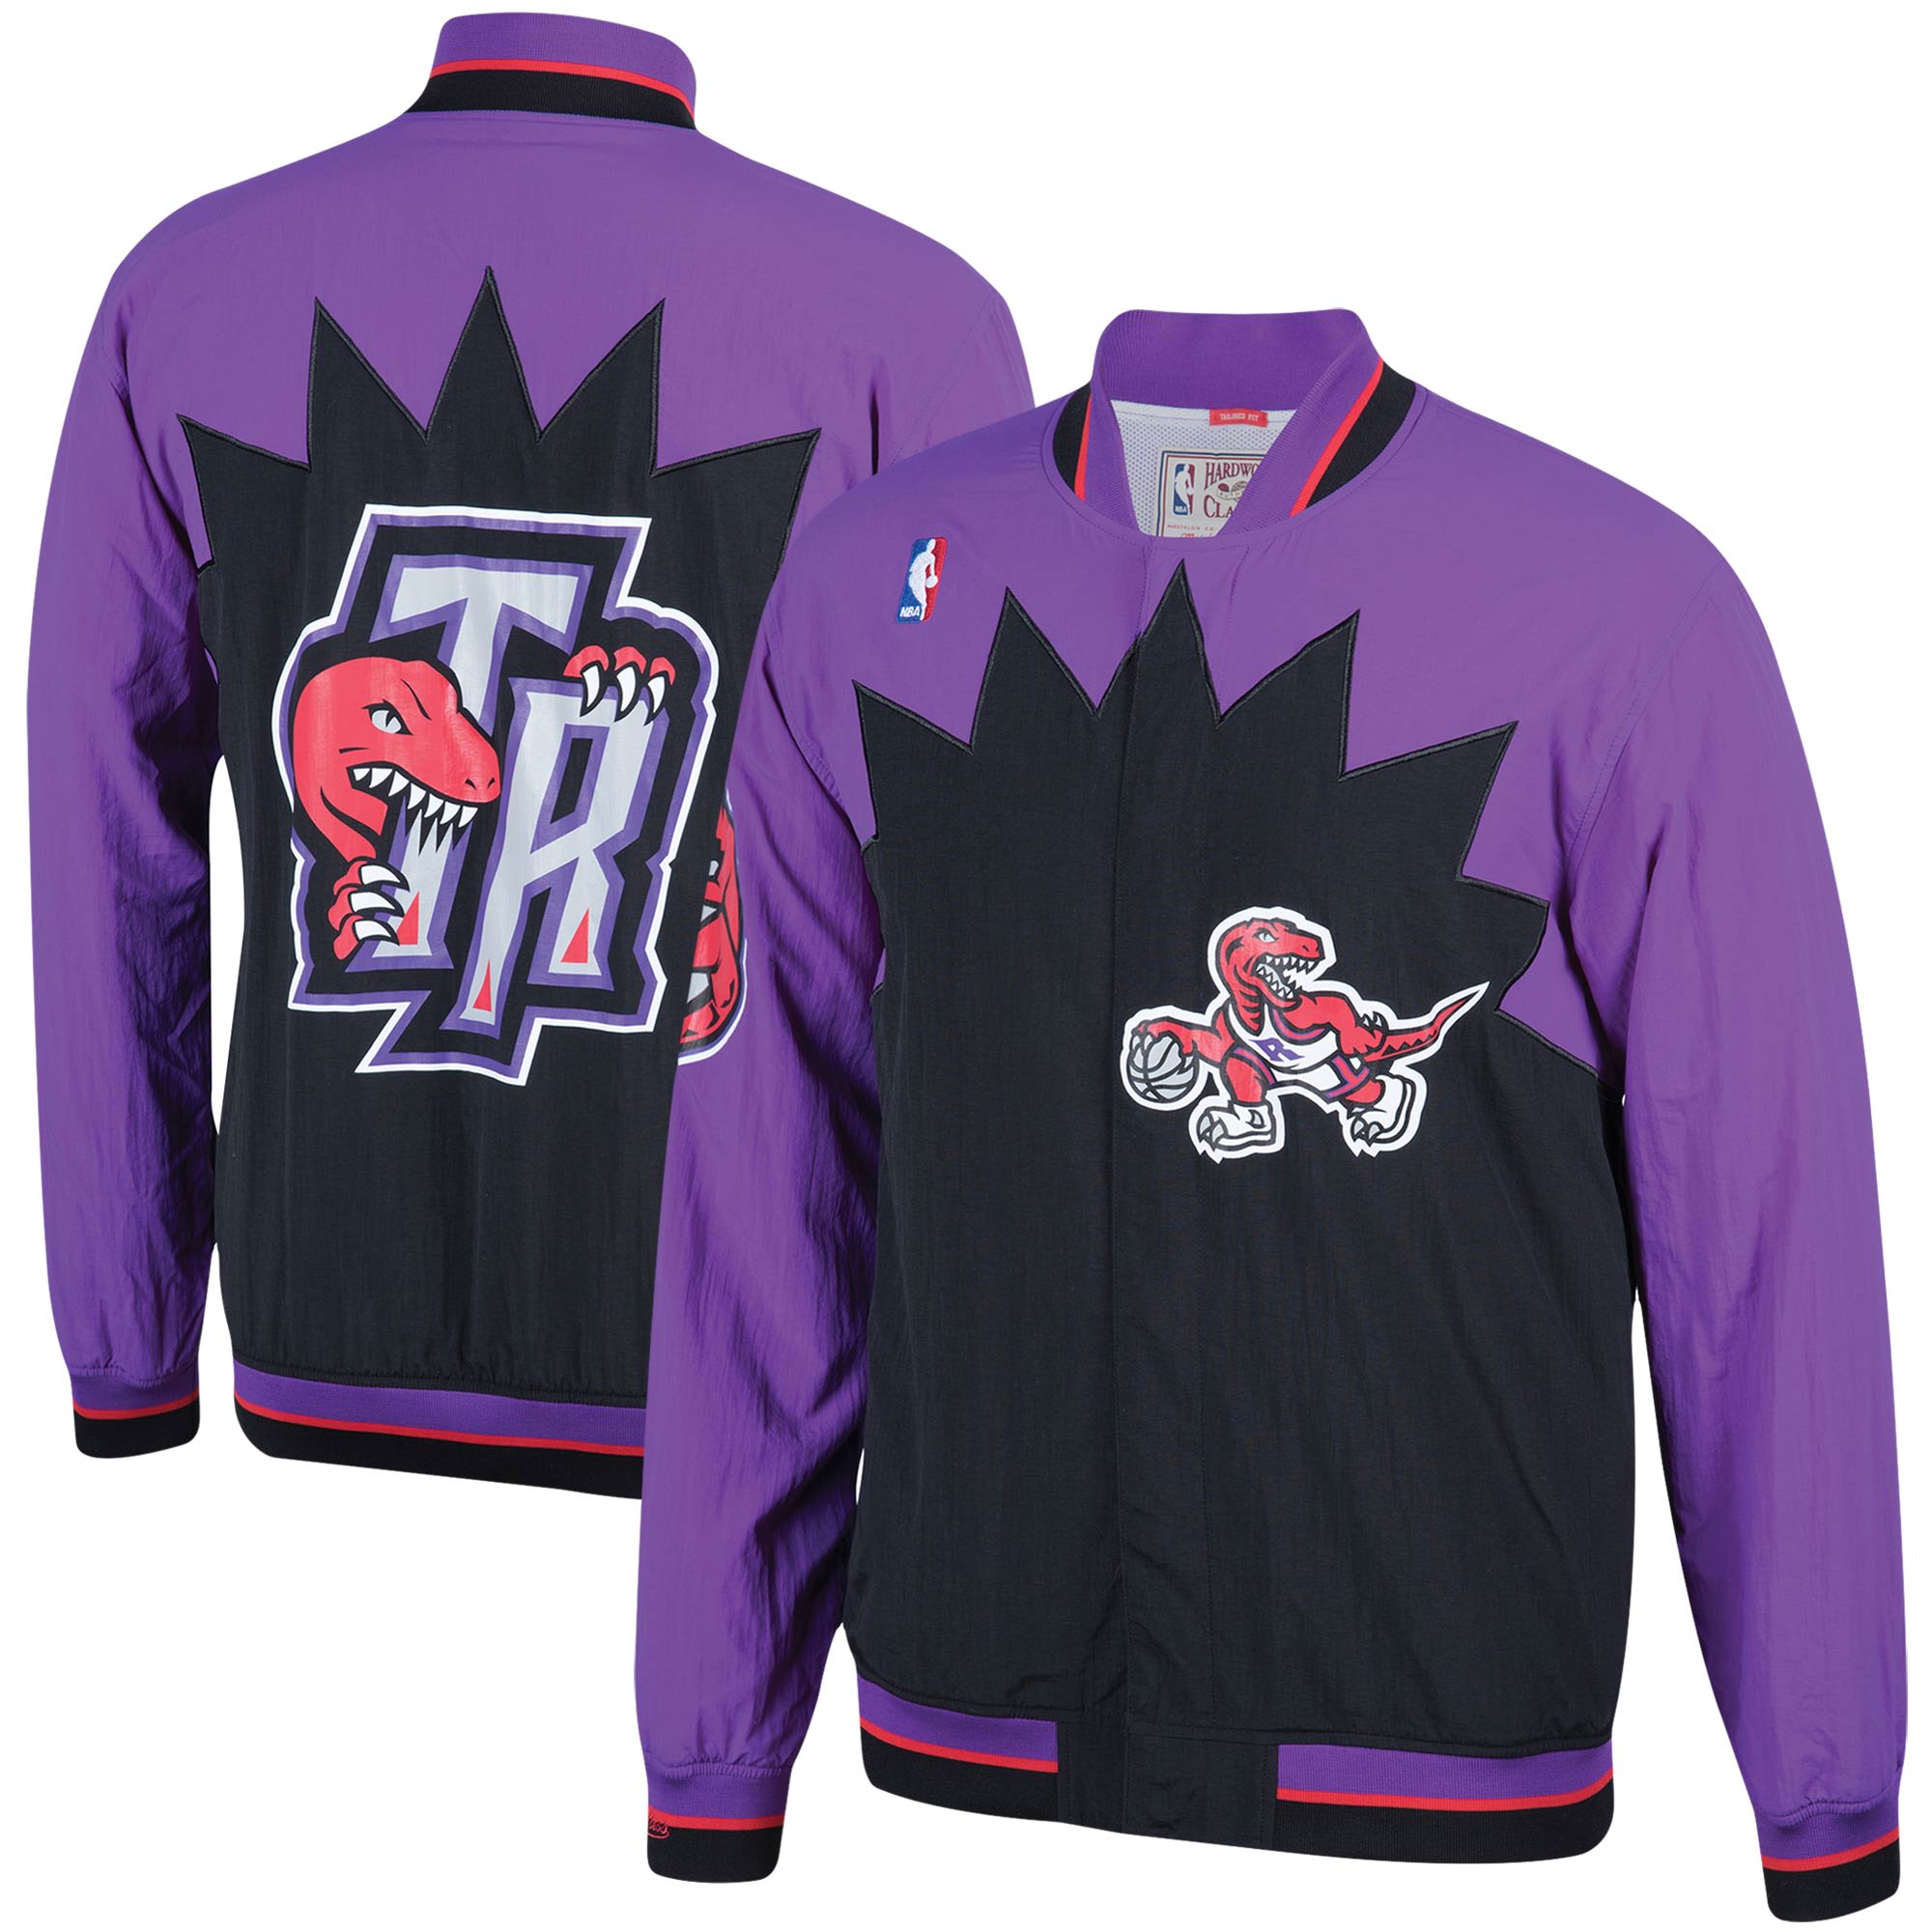 Lokken hiërarchie Schuldig Gear up with these cool Toronto Raptors throwback jerseys and shirts